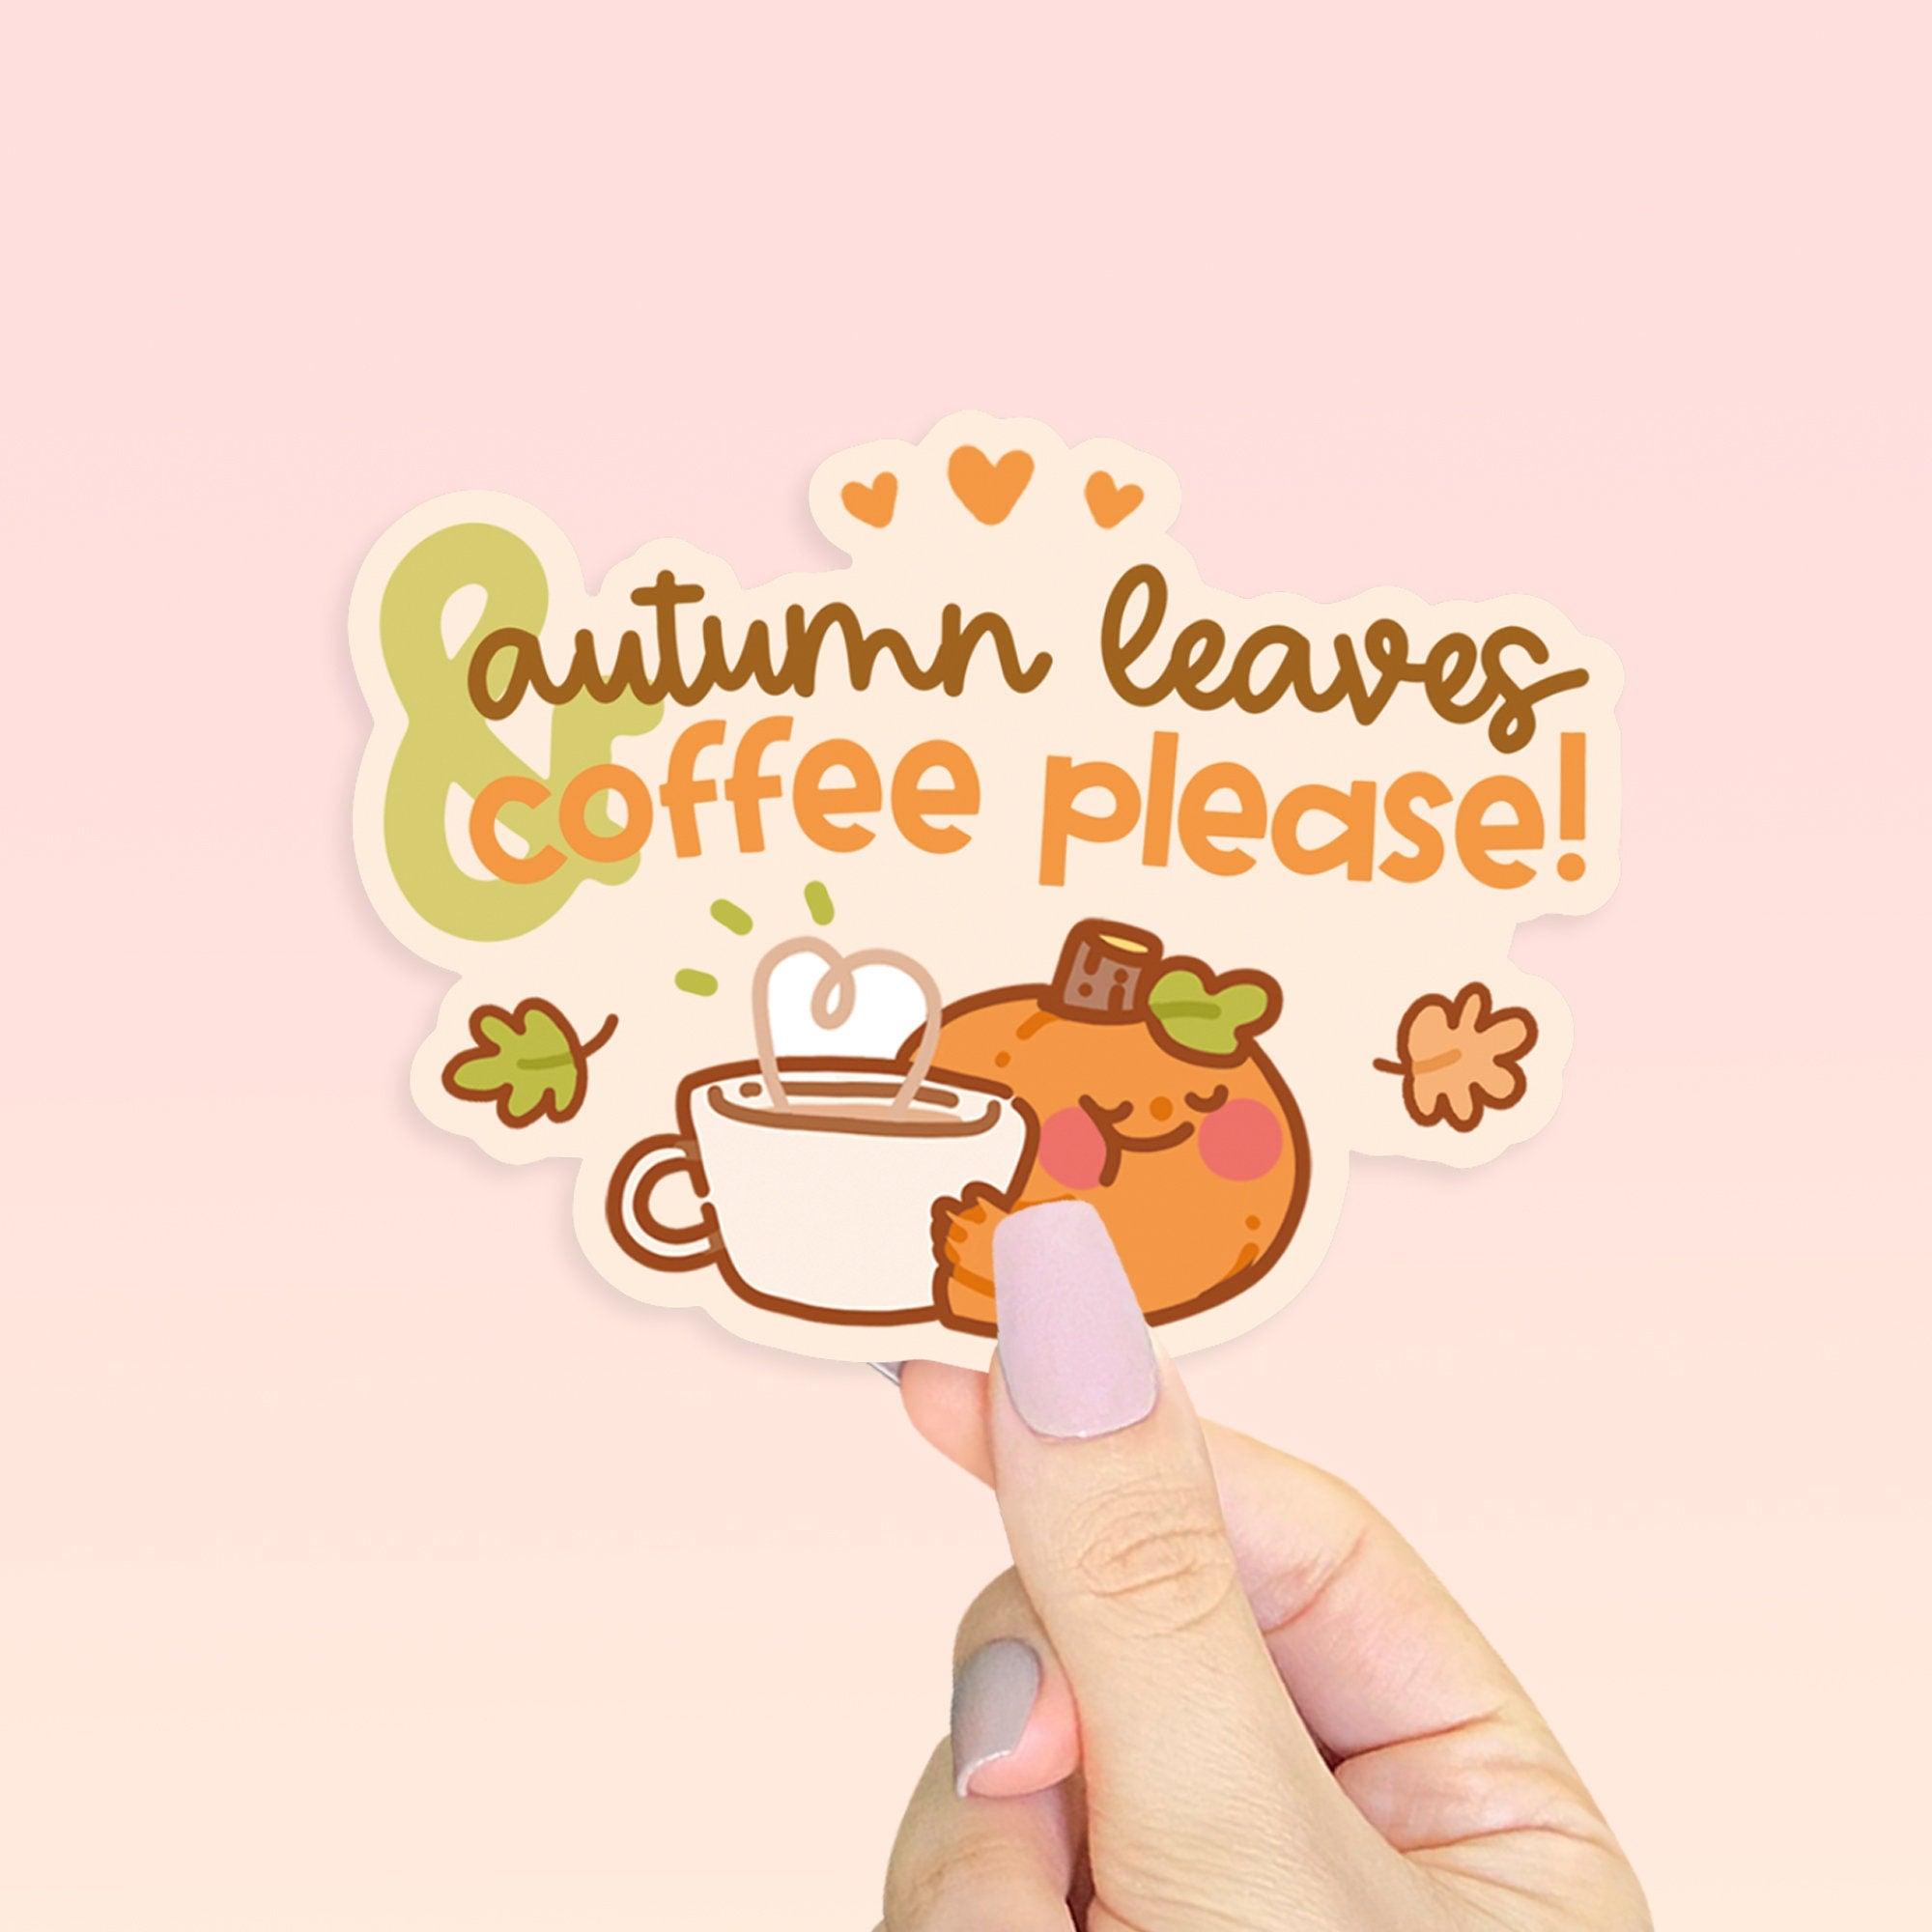 Autumn Leaves & Coffee Please waterproof vinyl sticker featuring Katnipp character and illustration, secondary